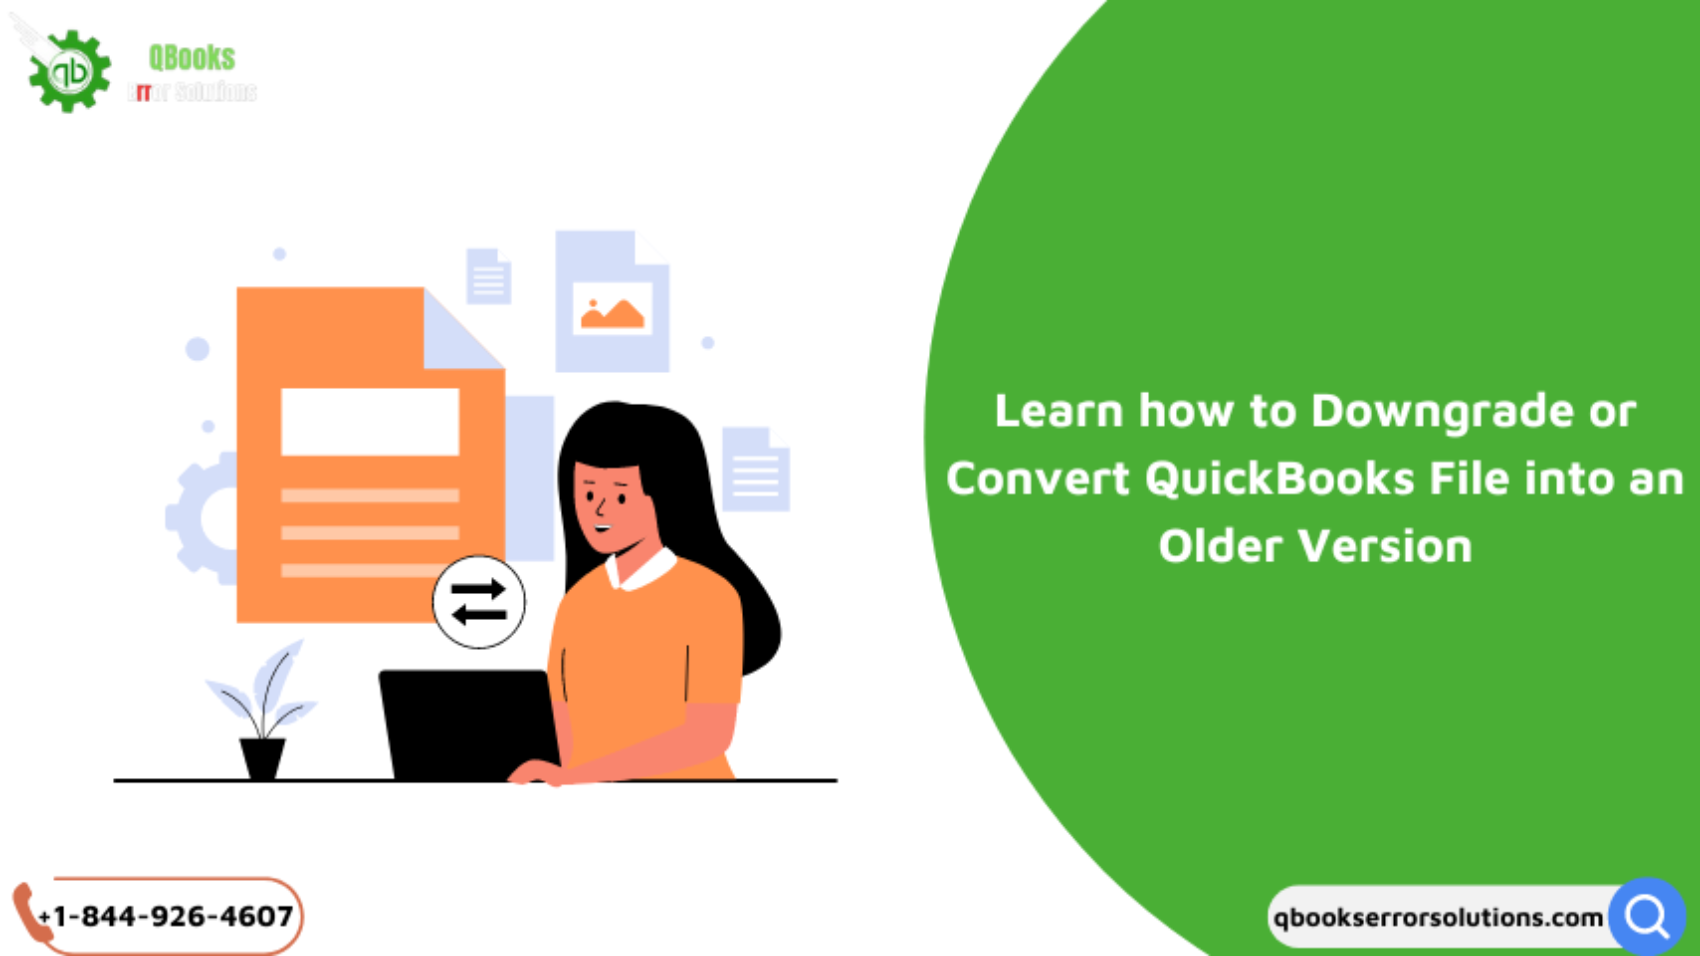 How to Convert QuickBooks File into an Older Version